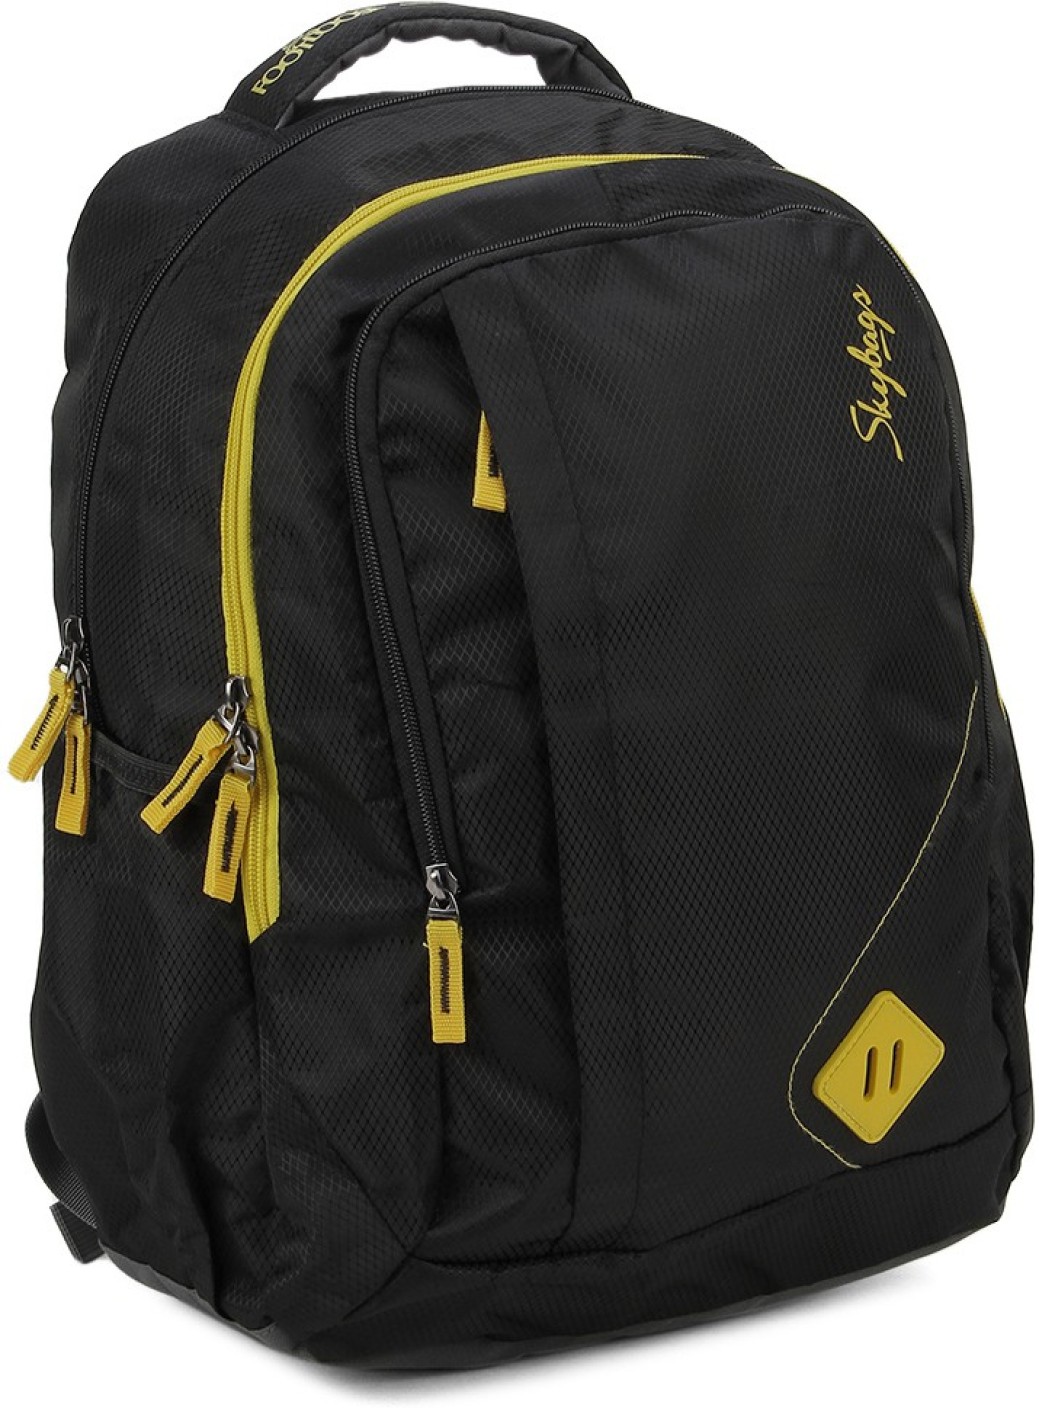 Skybags Backpack Black - Price in India | www.bagssaleusa.com/louis-vuitton/